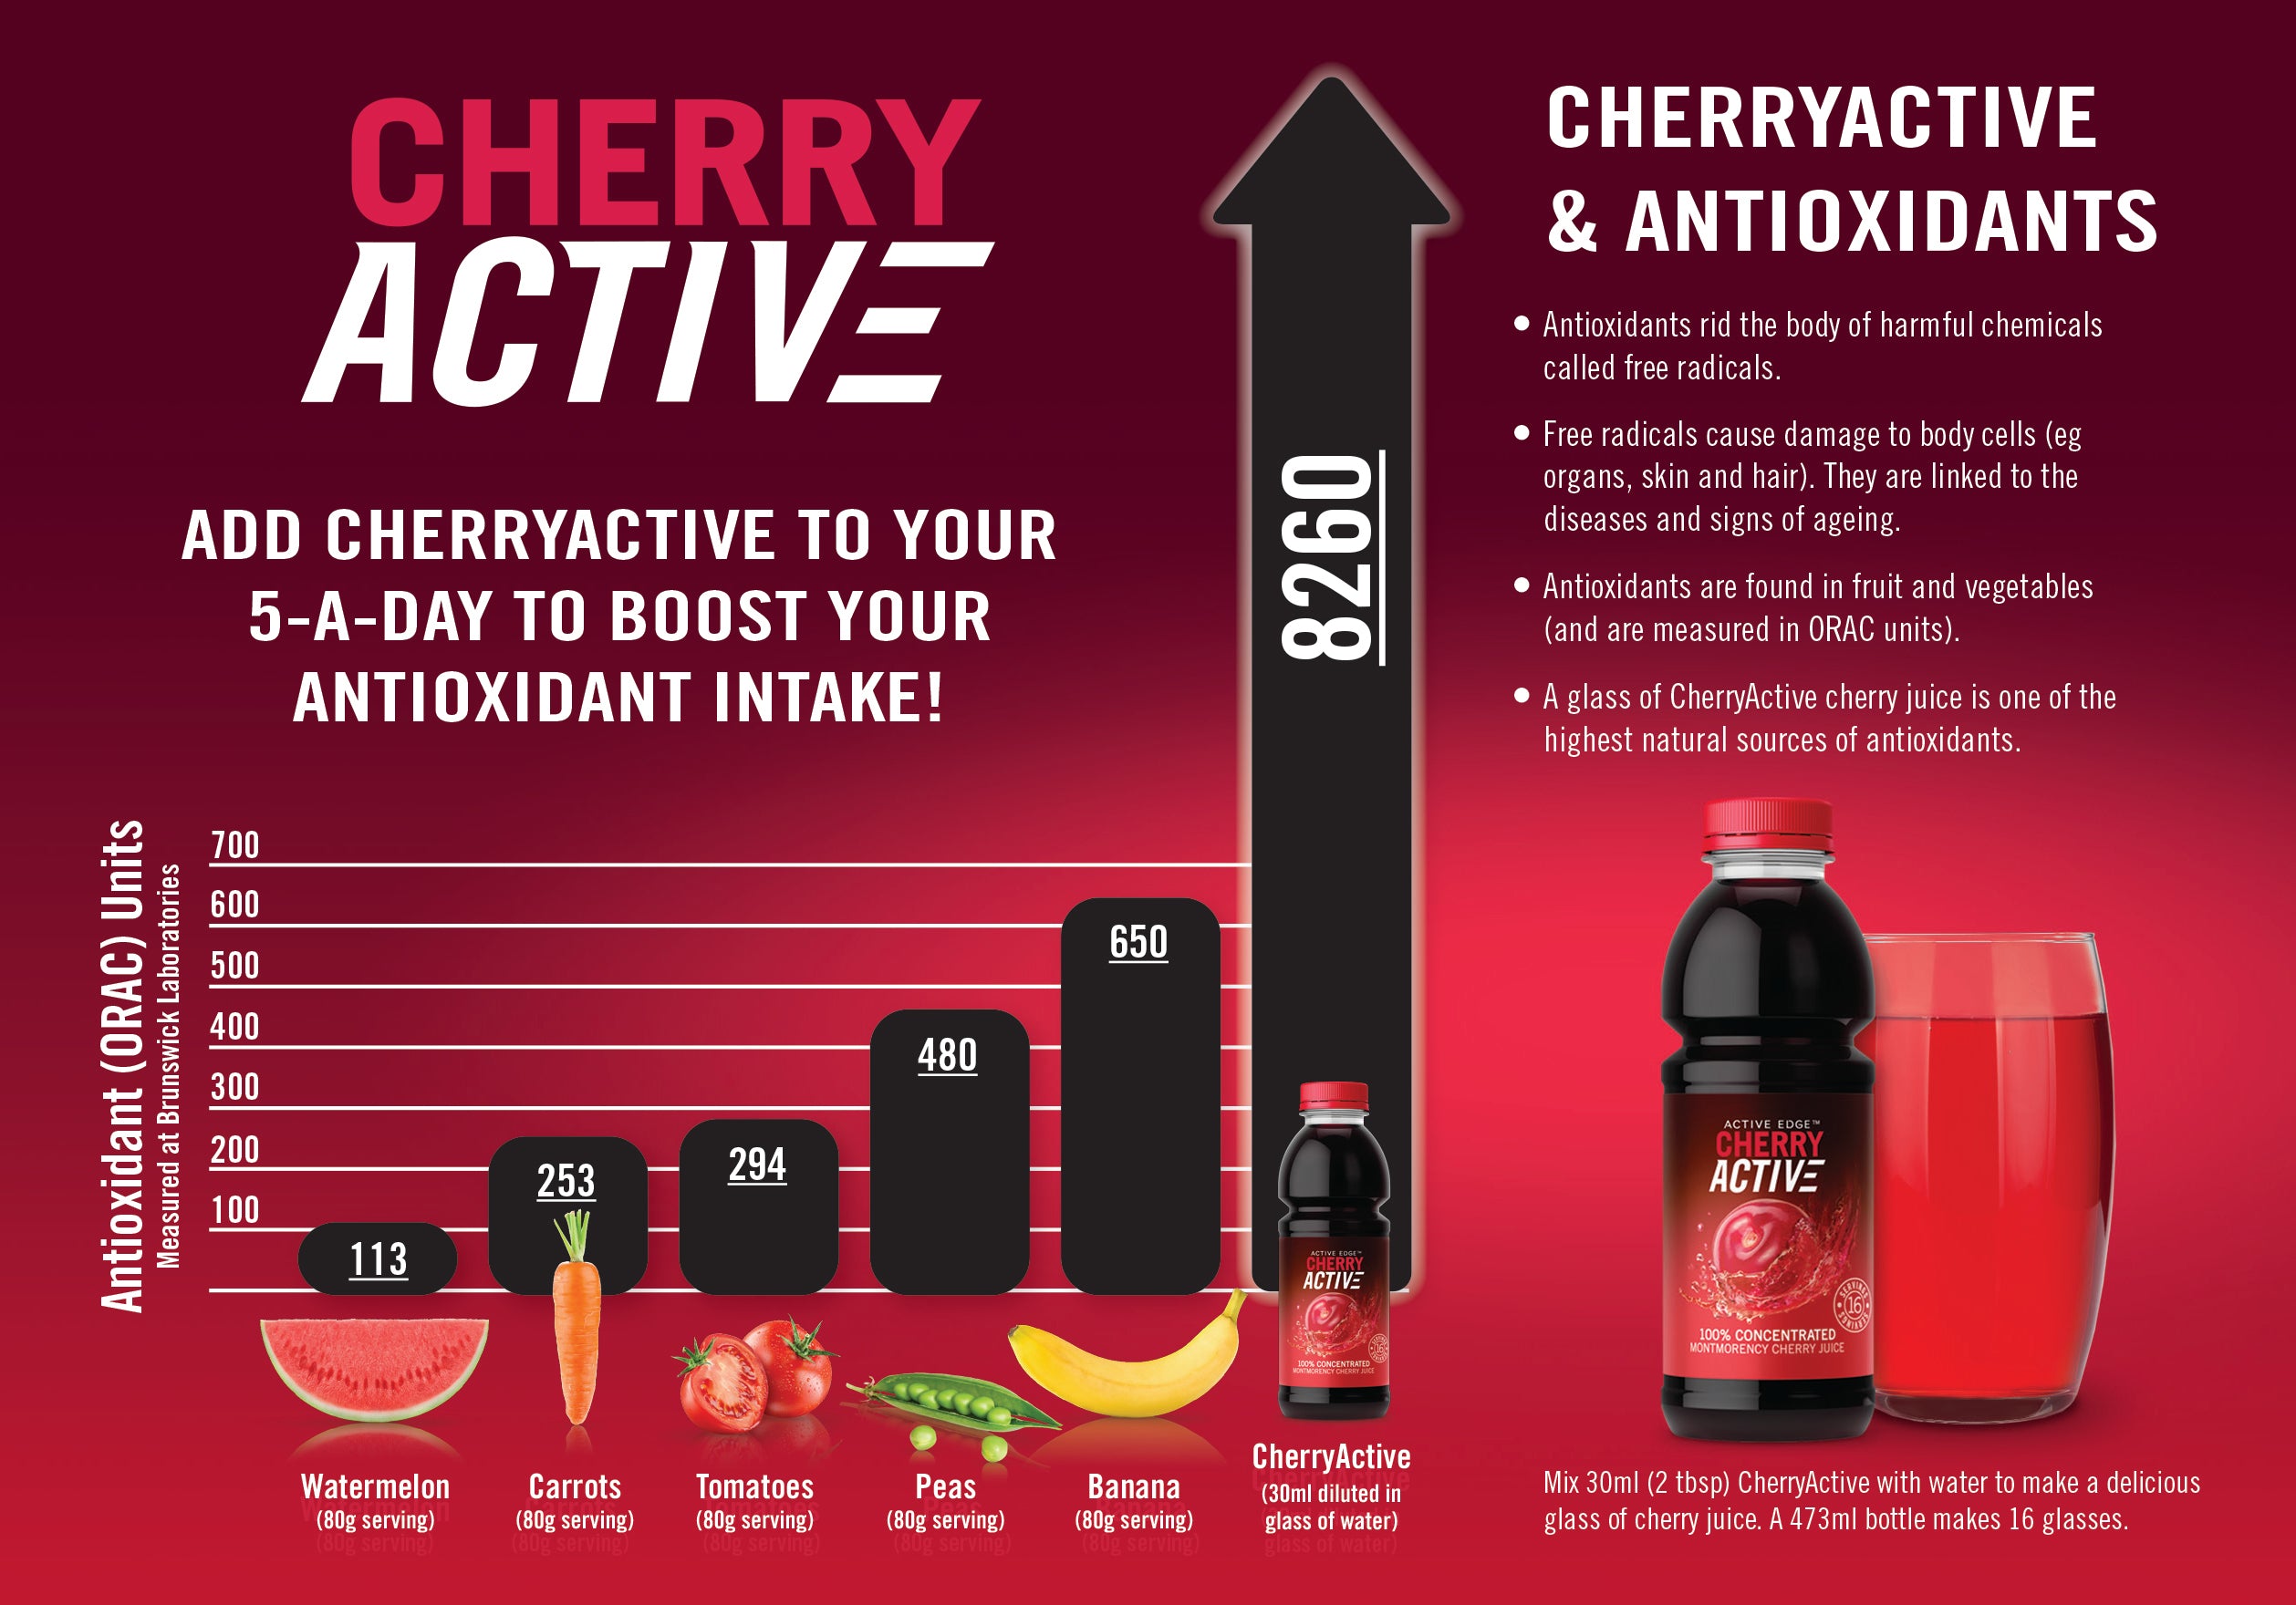 Cherry juice ‘is as good as 23 portions of fruit and veg’